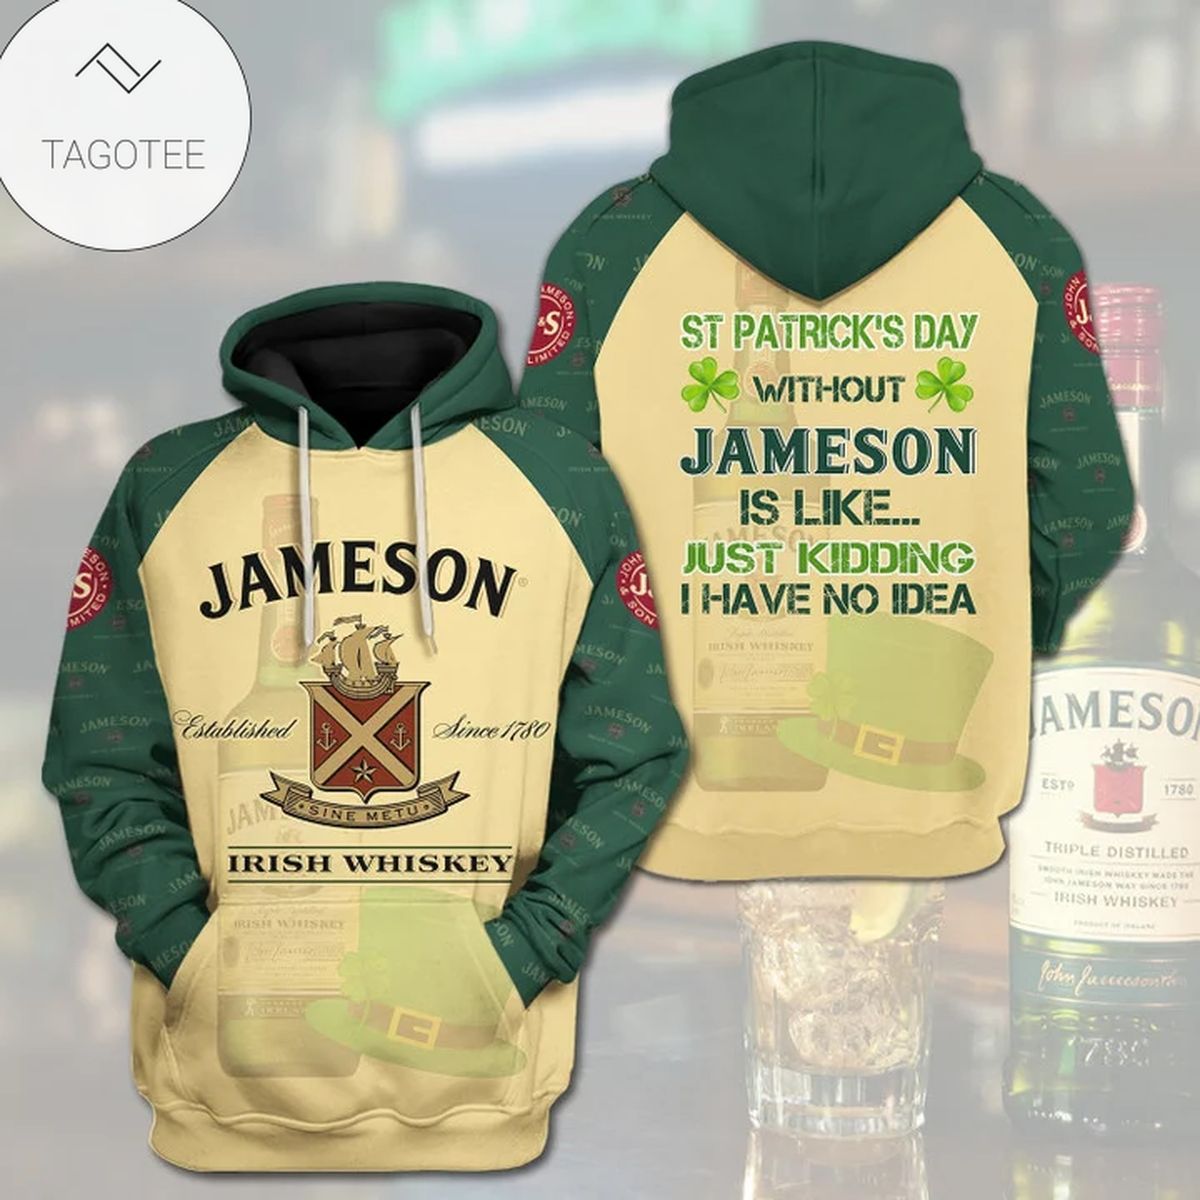 St Patrick's Day Without Jameson Is Like Just Kidding I Have No Idea Hoodie